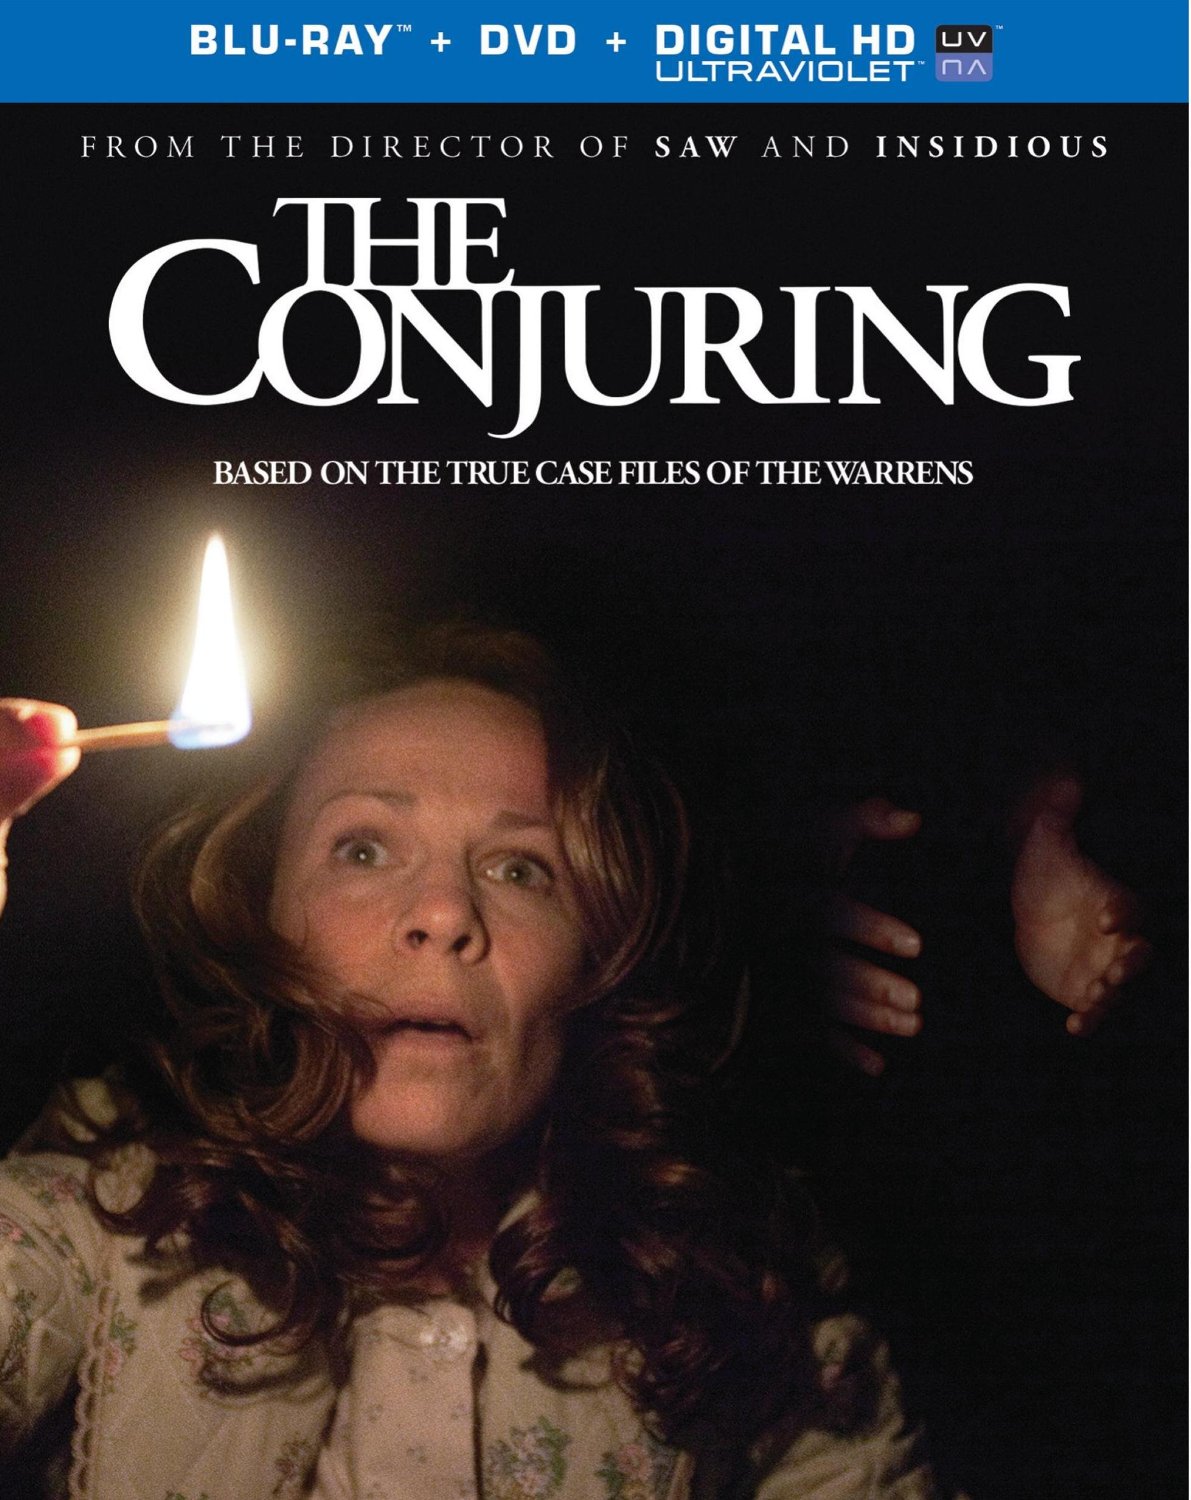 'The Conjuring' Blu-ray DVD Combo Pack